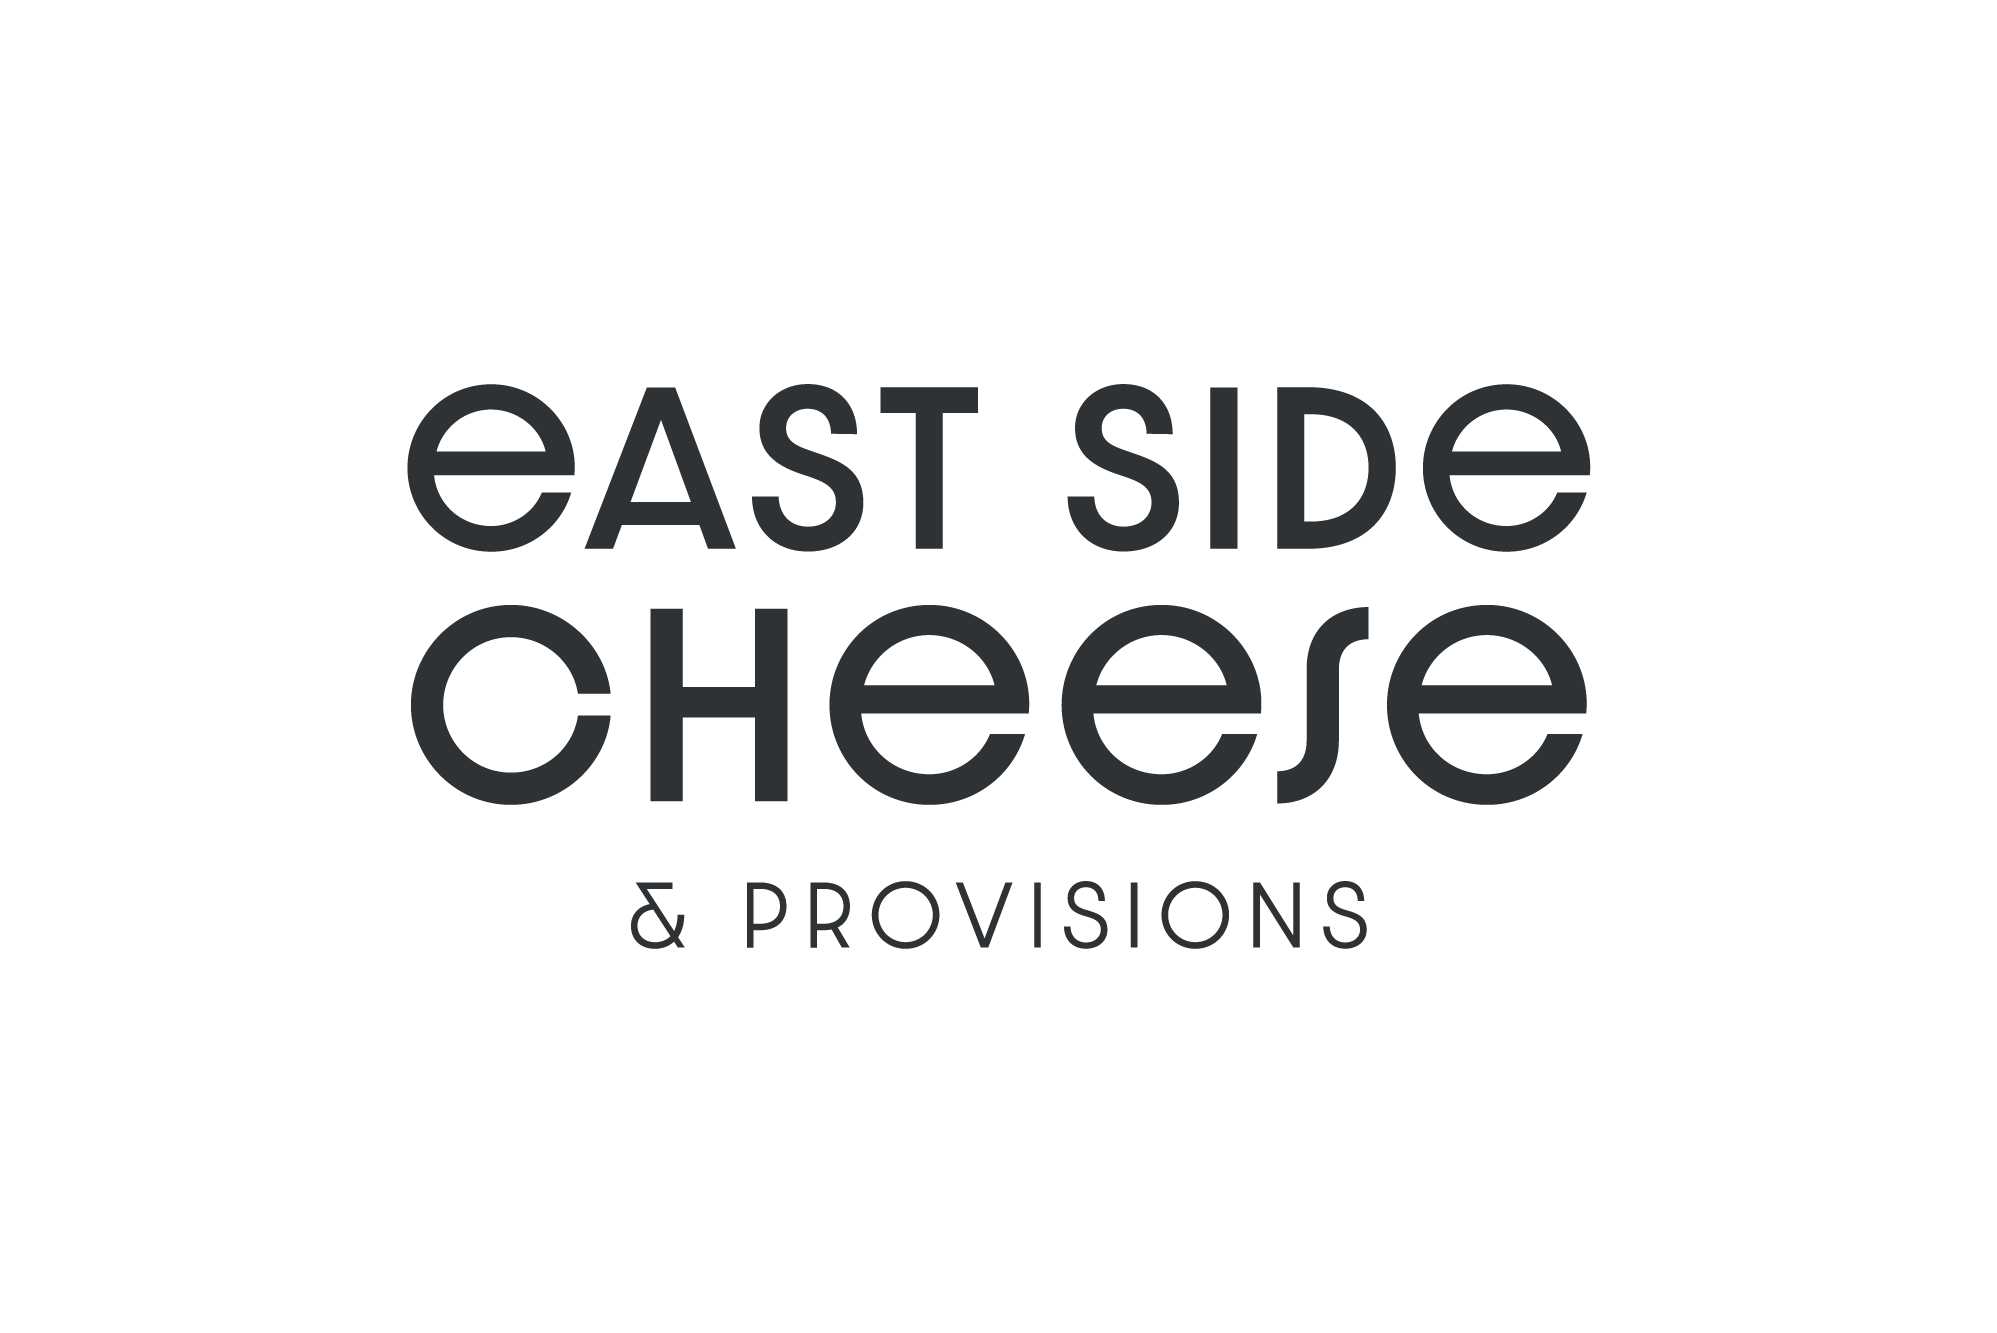 East Side Cheese & Provisions